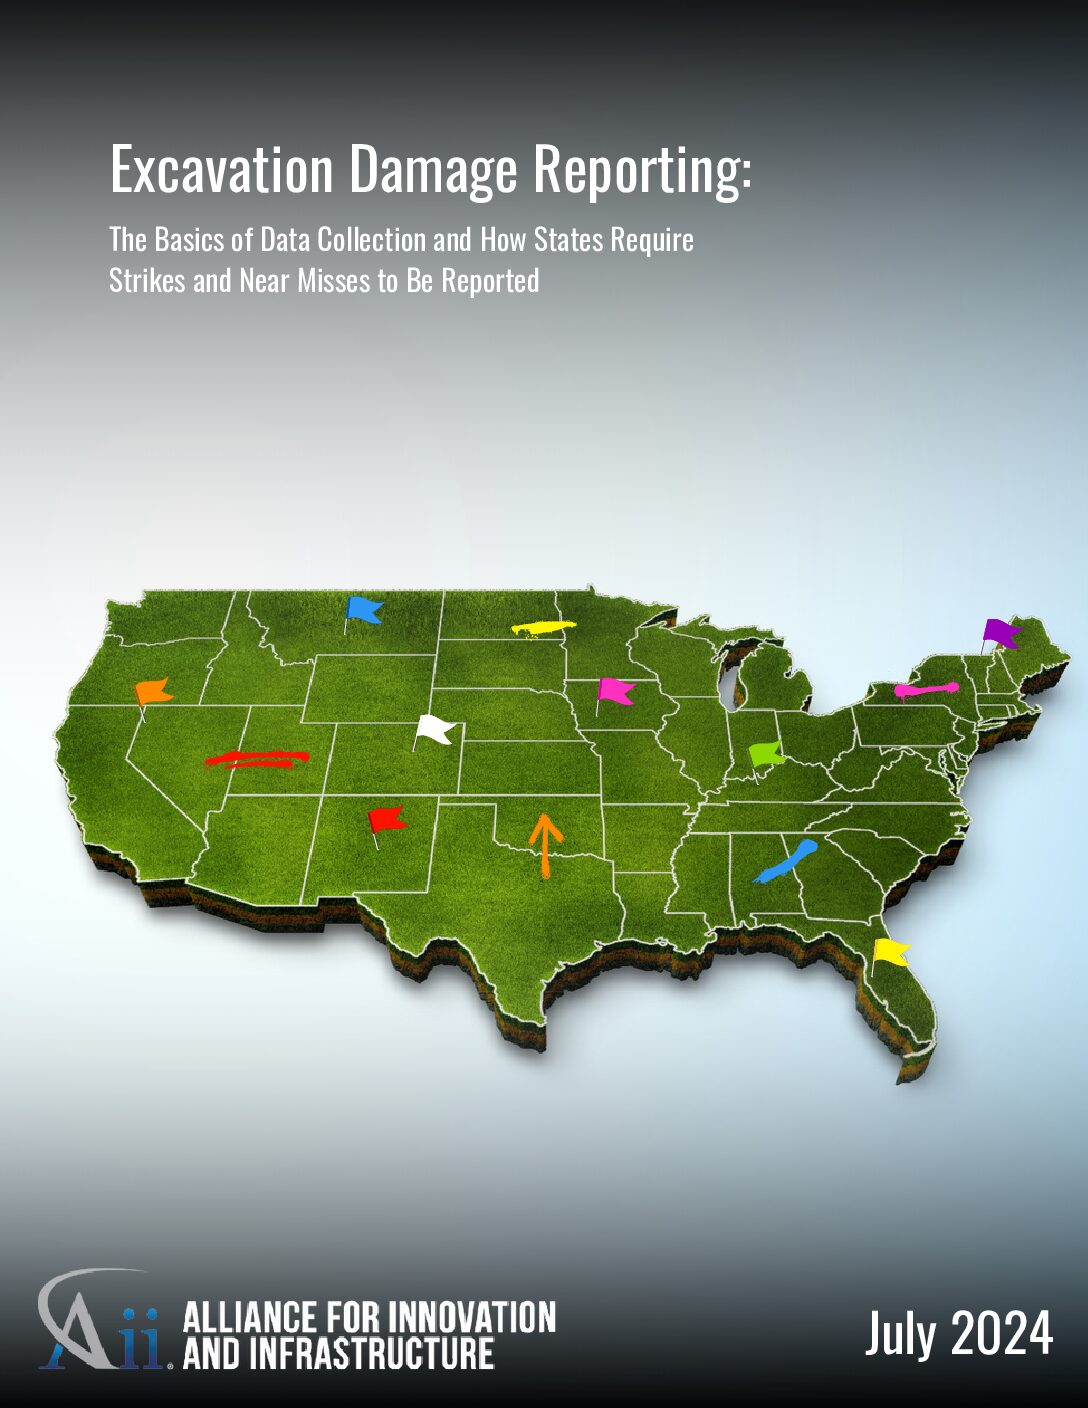 Excavation Damage Reporting: The Basics of Data Collection and How States Require Strikes and Near Misses to Be Reported